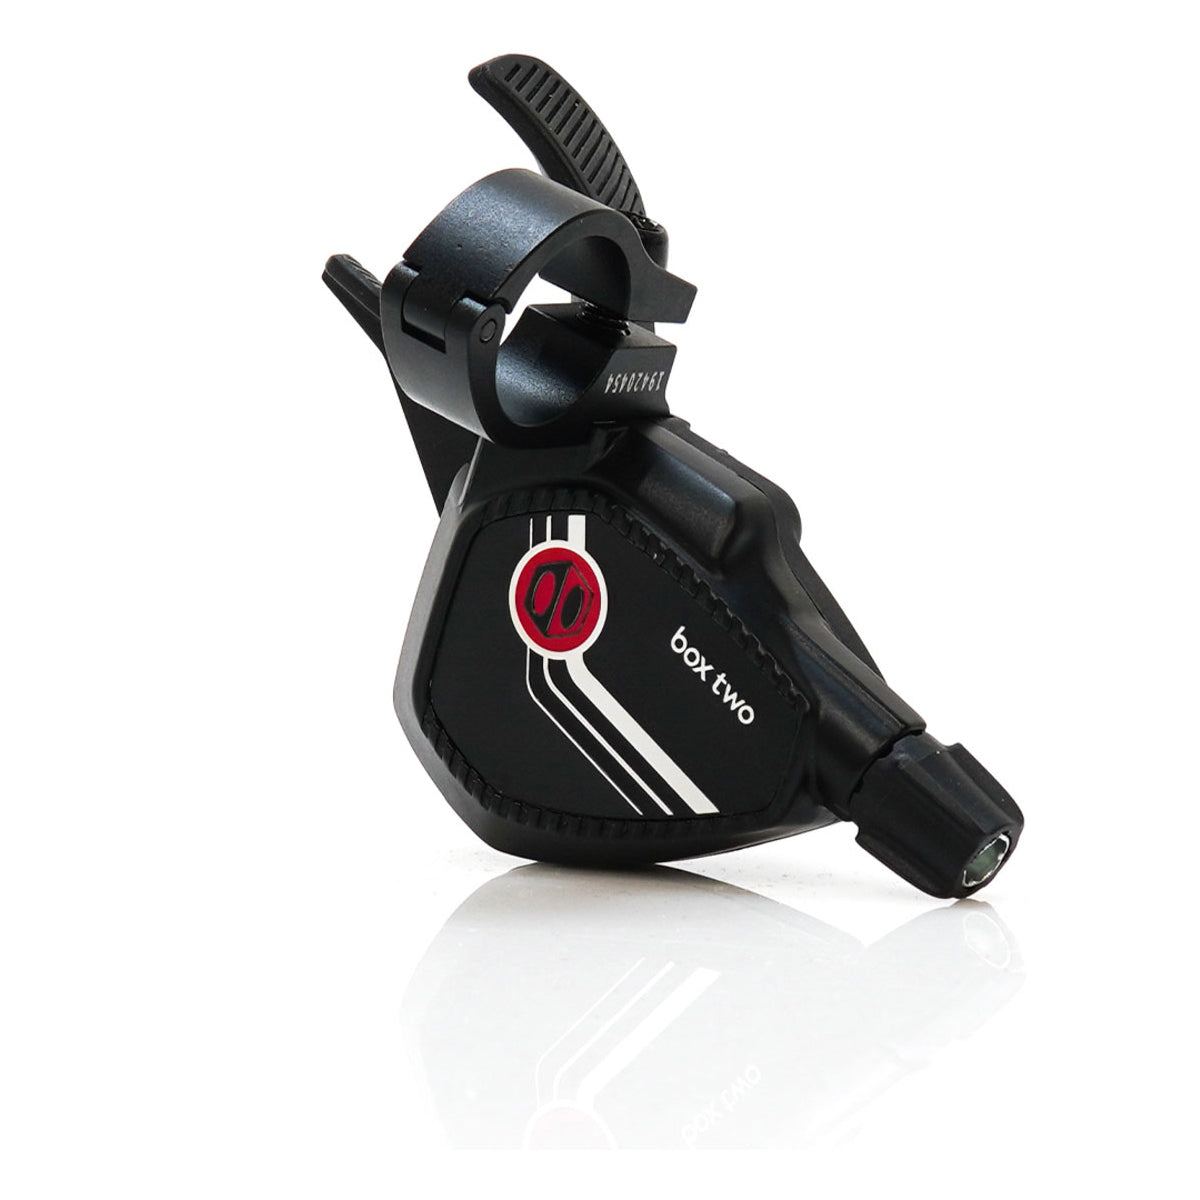 BOX Two Prime 9 Speed Twin Lever Shifter - Black - Multi Shift - 22.2mm Bar Clamp - 9 Speed